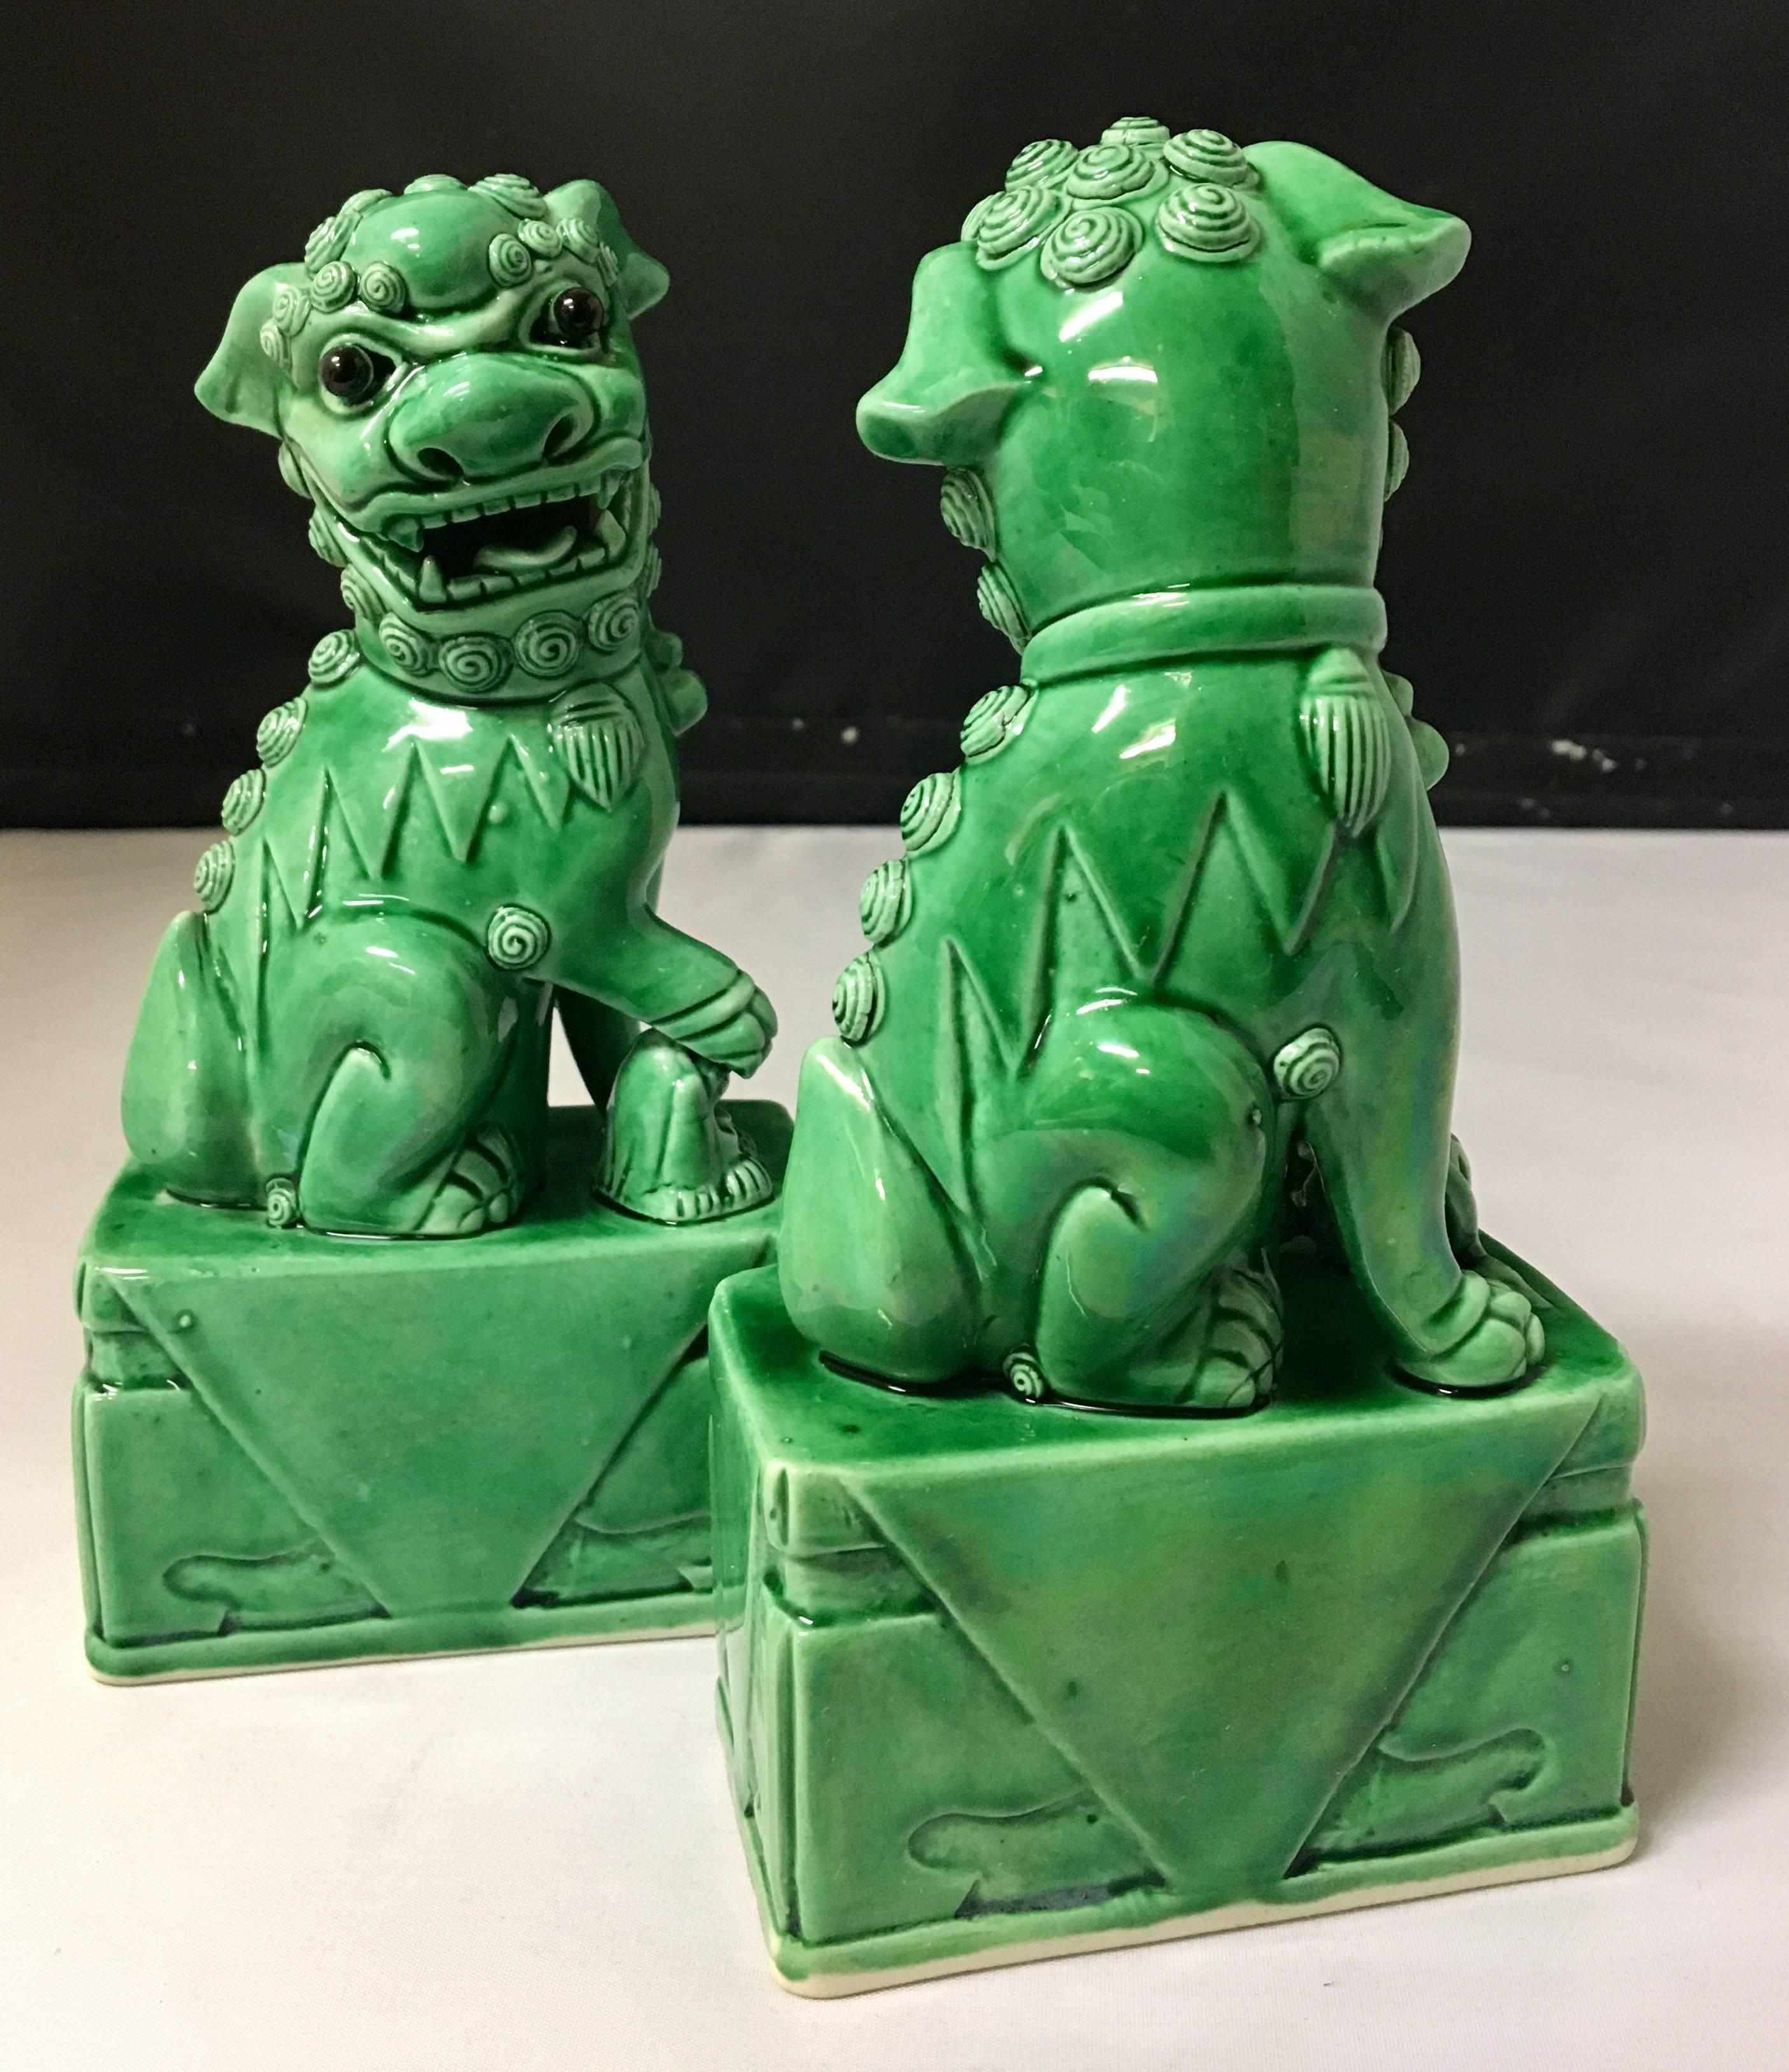 A very nice pair of vintage, emerald green, ceramic foo dogs from Japan. Excellent condition and patina; makes a fun decor item in any room!